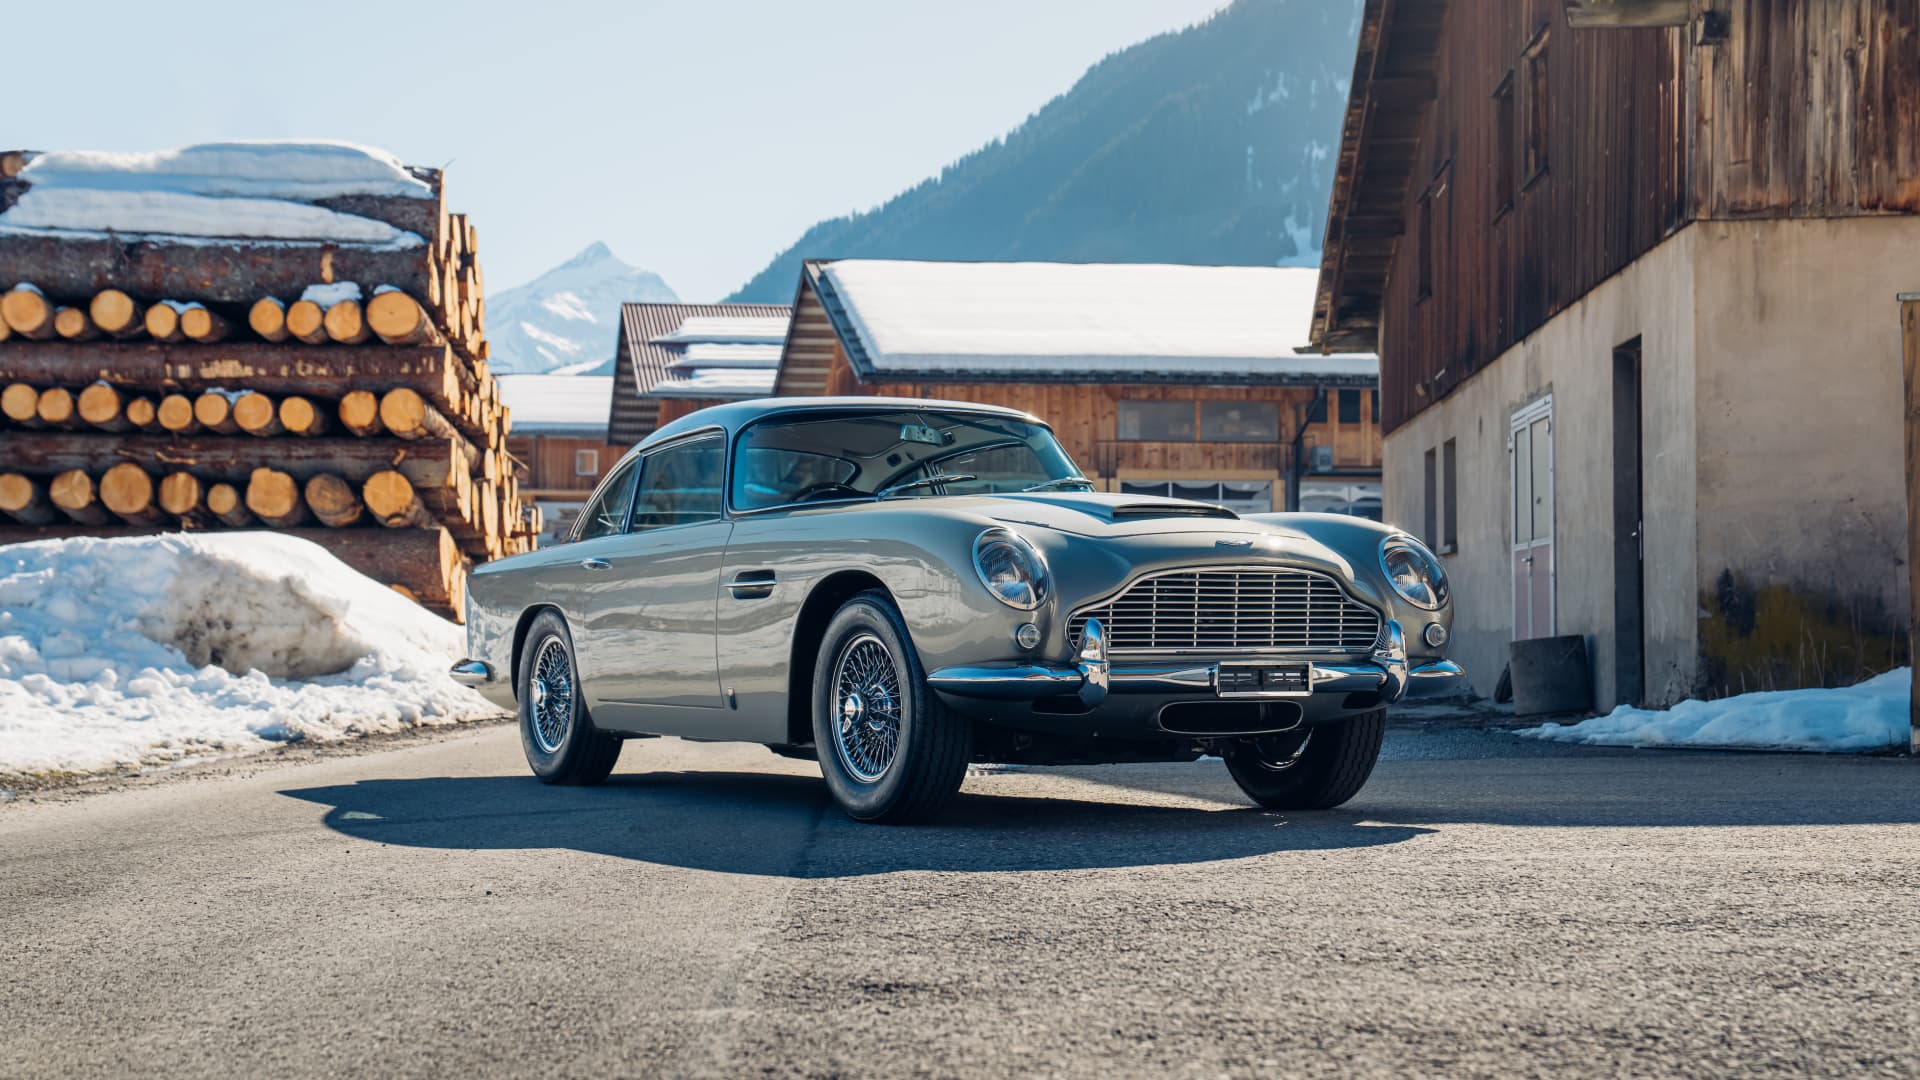 Sean Connery’s ‘James Bond’ Aston Martin DB5 is up for public sale